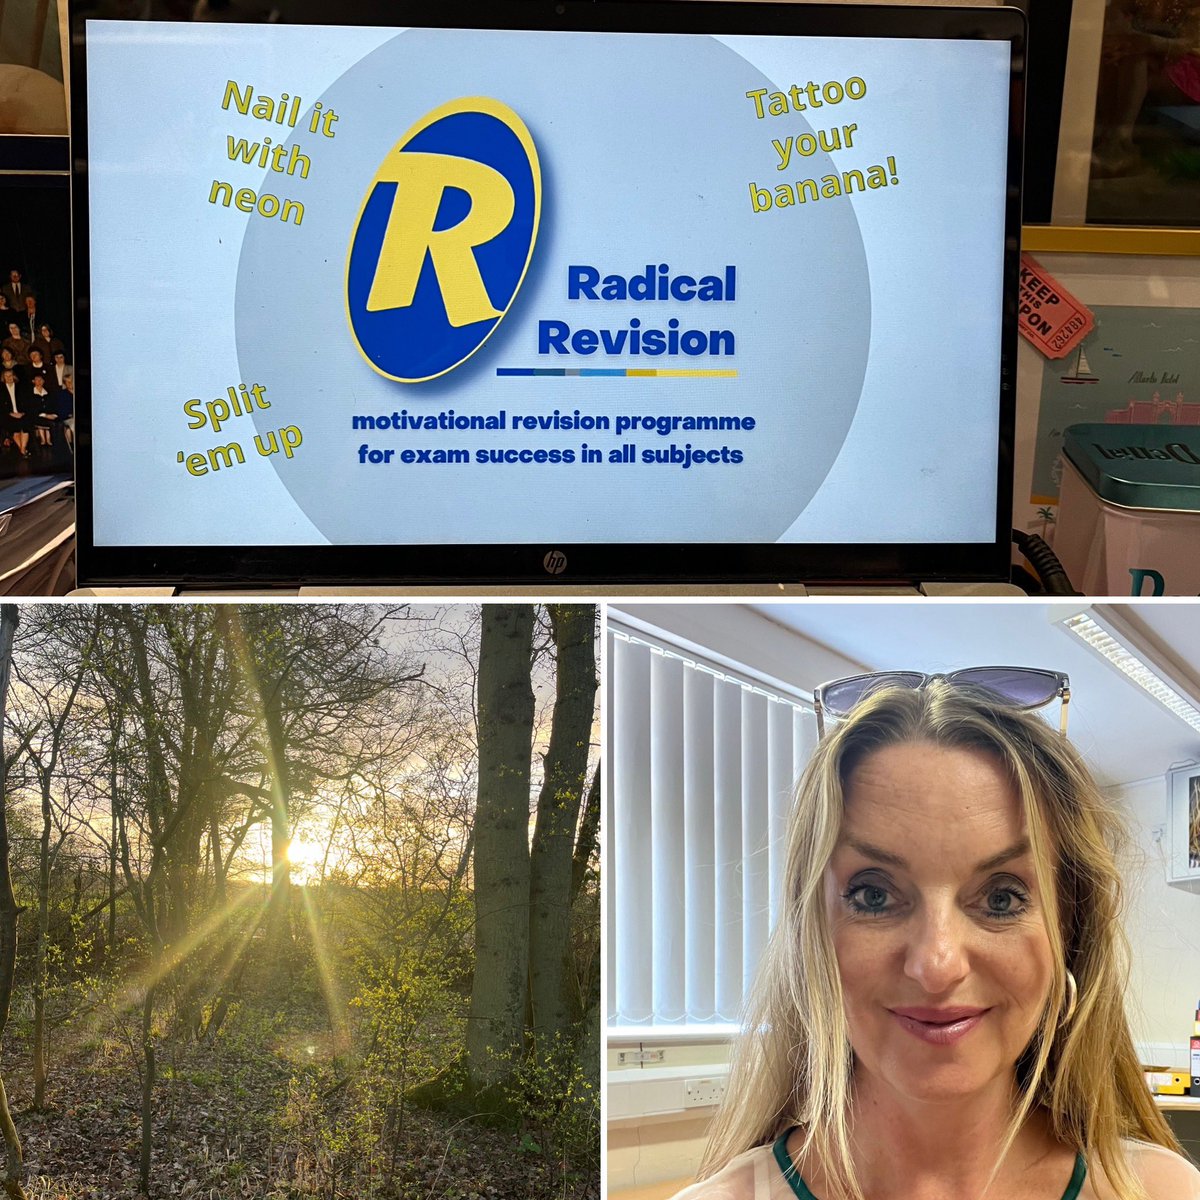 A Digital Day! After the frenetic travelling of the last few months, it was nice to be able to work from the office today and I especially enjoyed delivering my Radical Revision online session for the parents @Carlton_Academy @RedhillTrust #Revision #exams